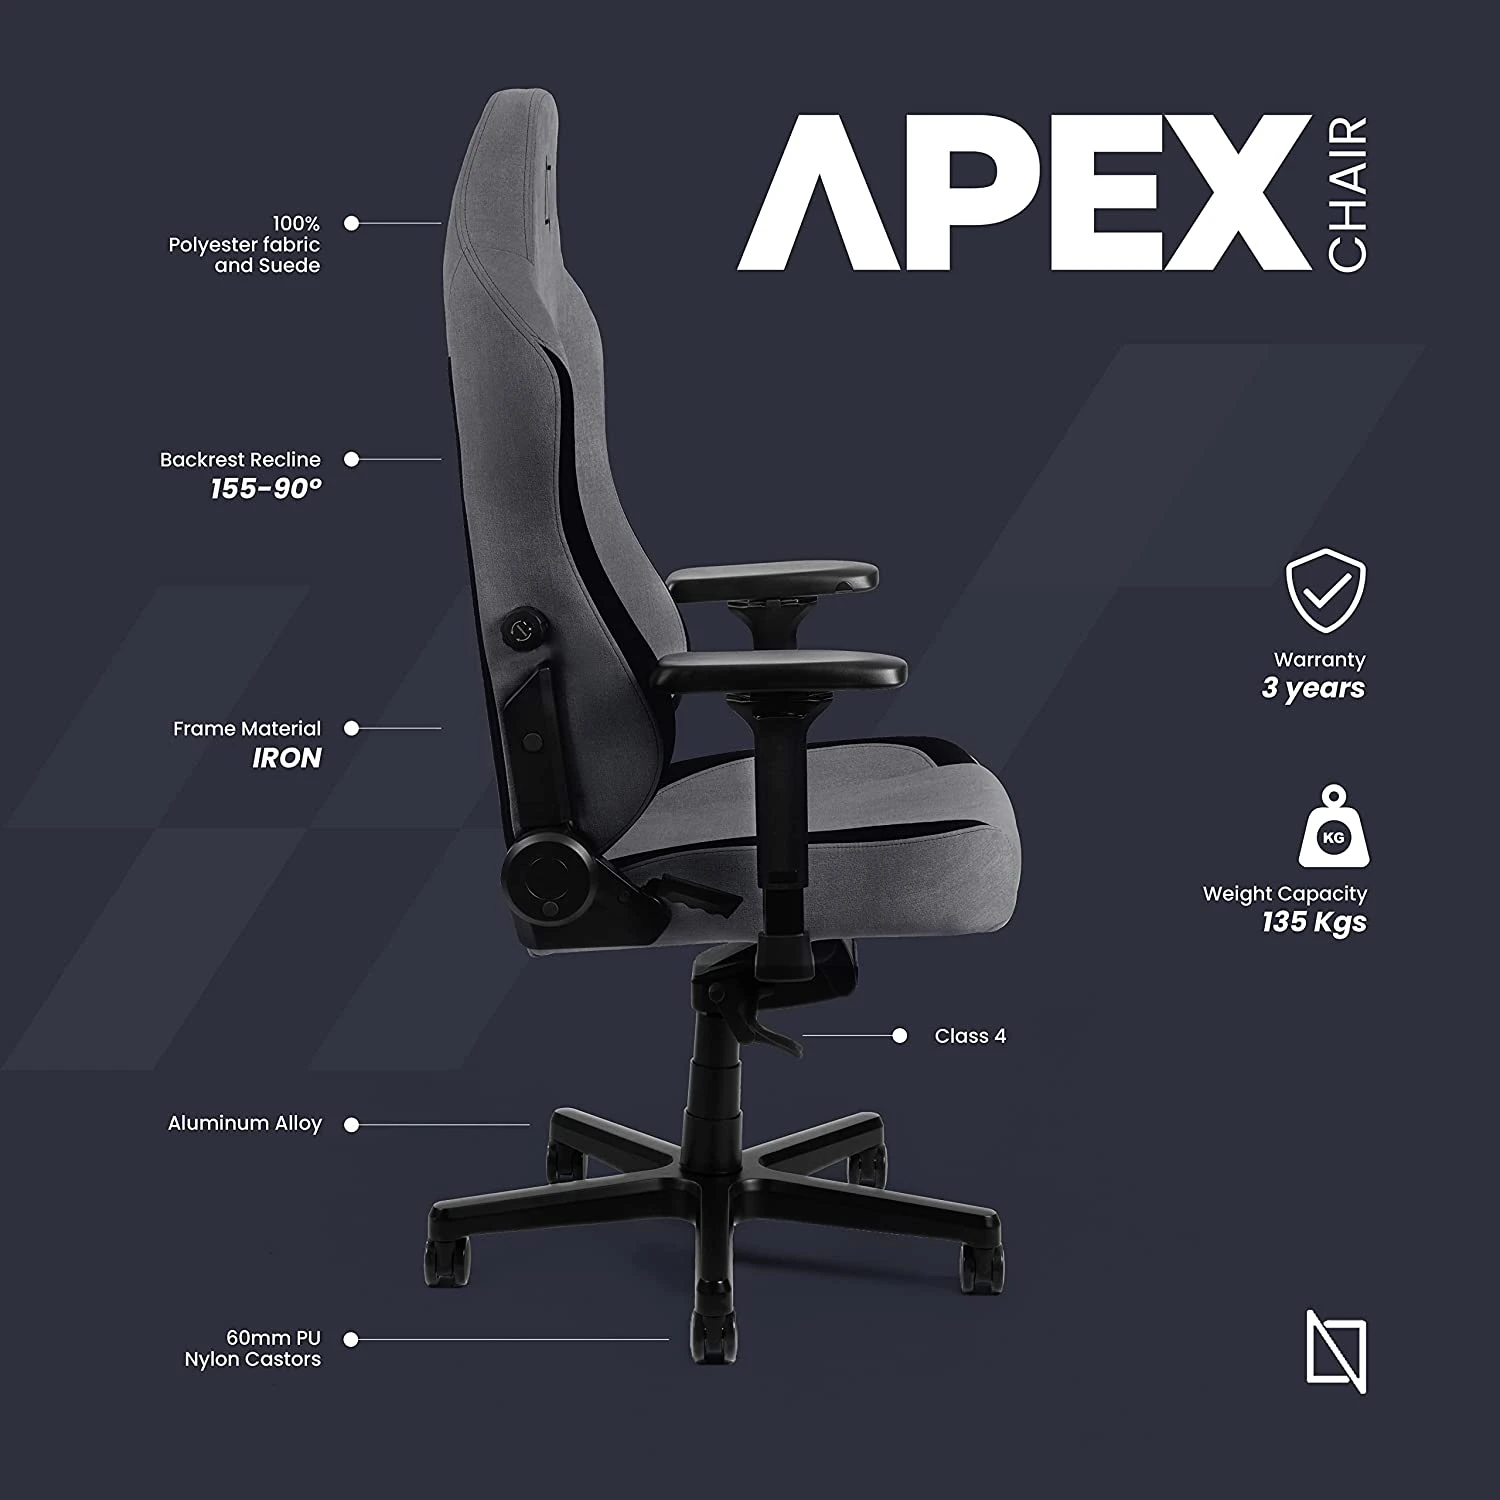 APEX Chair, Premium Ergonomic Soft Fabric Gaming Chair with Memory Foam Pillows, Magnetic Headrest & Integrated Lumbar Support By Navodesk